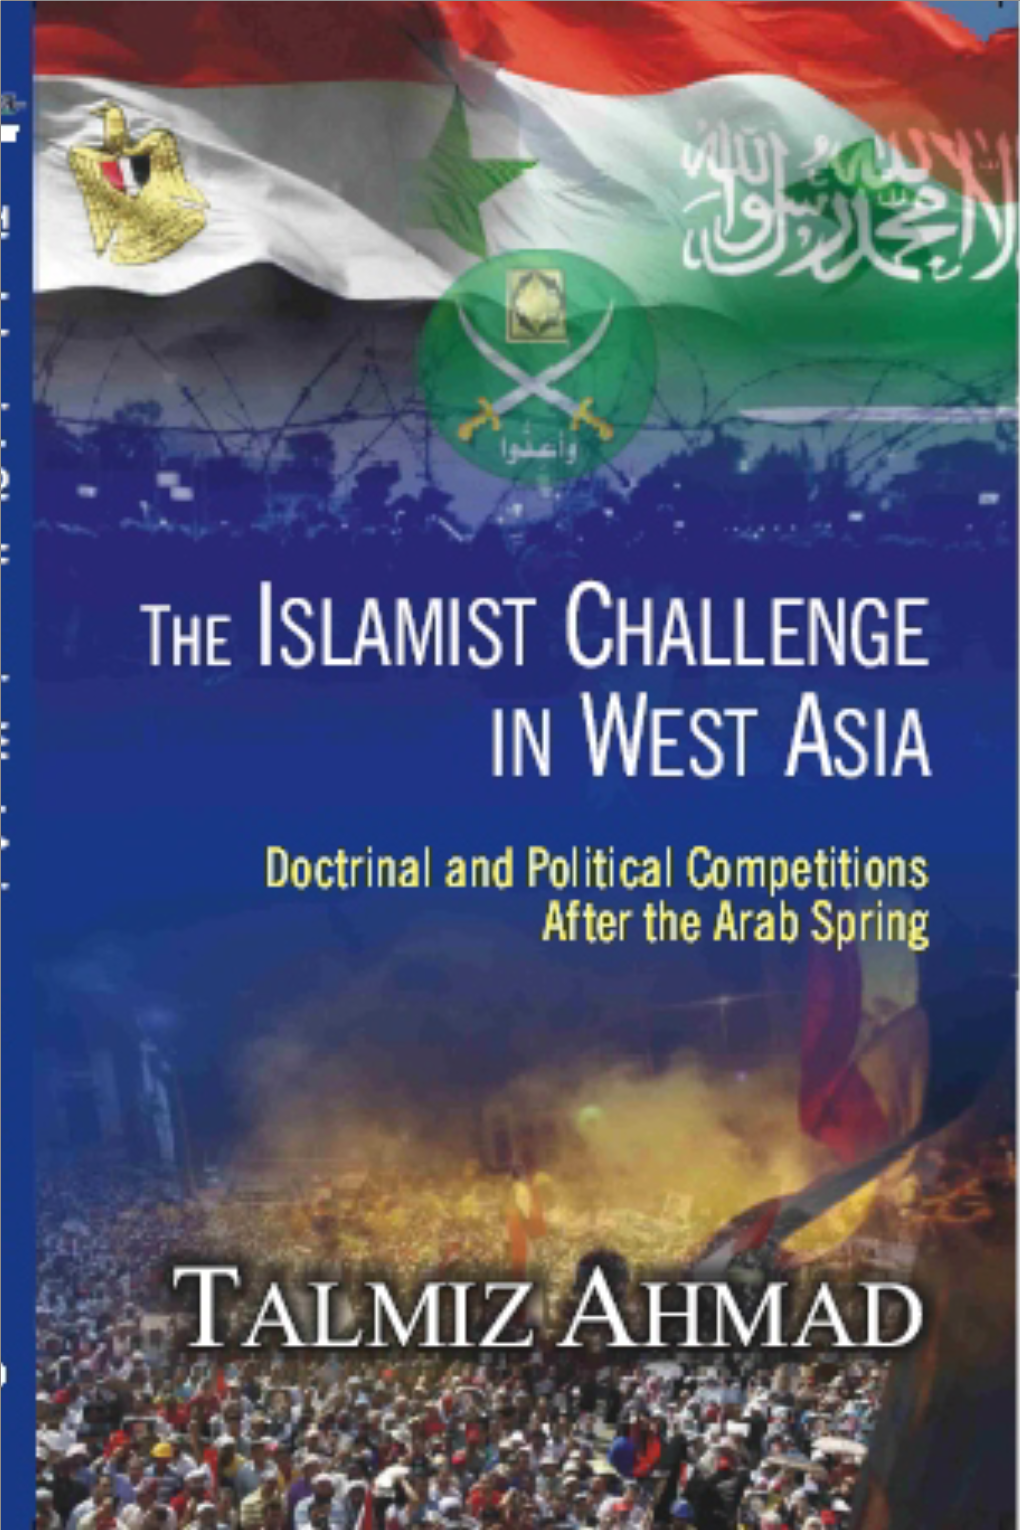 The Islamist Challenge in West Asia Doctrinal and Political Competitions After the Arab Spring